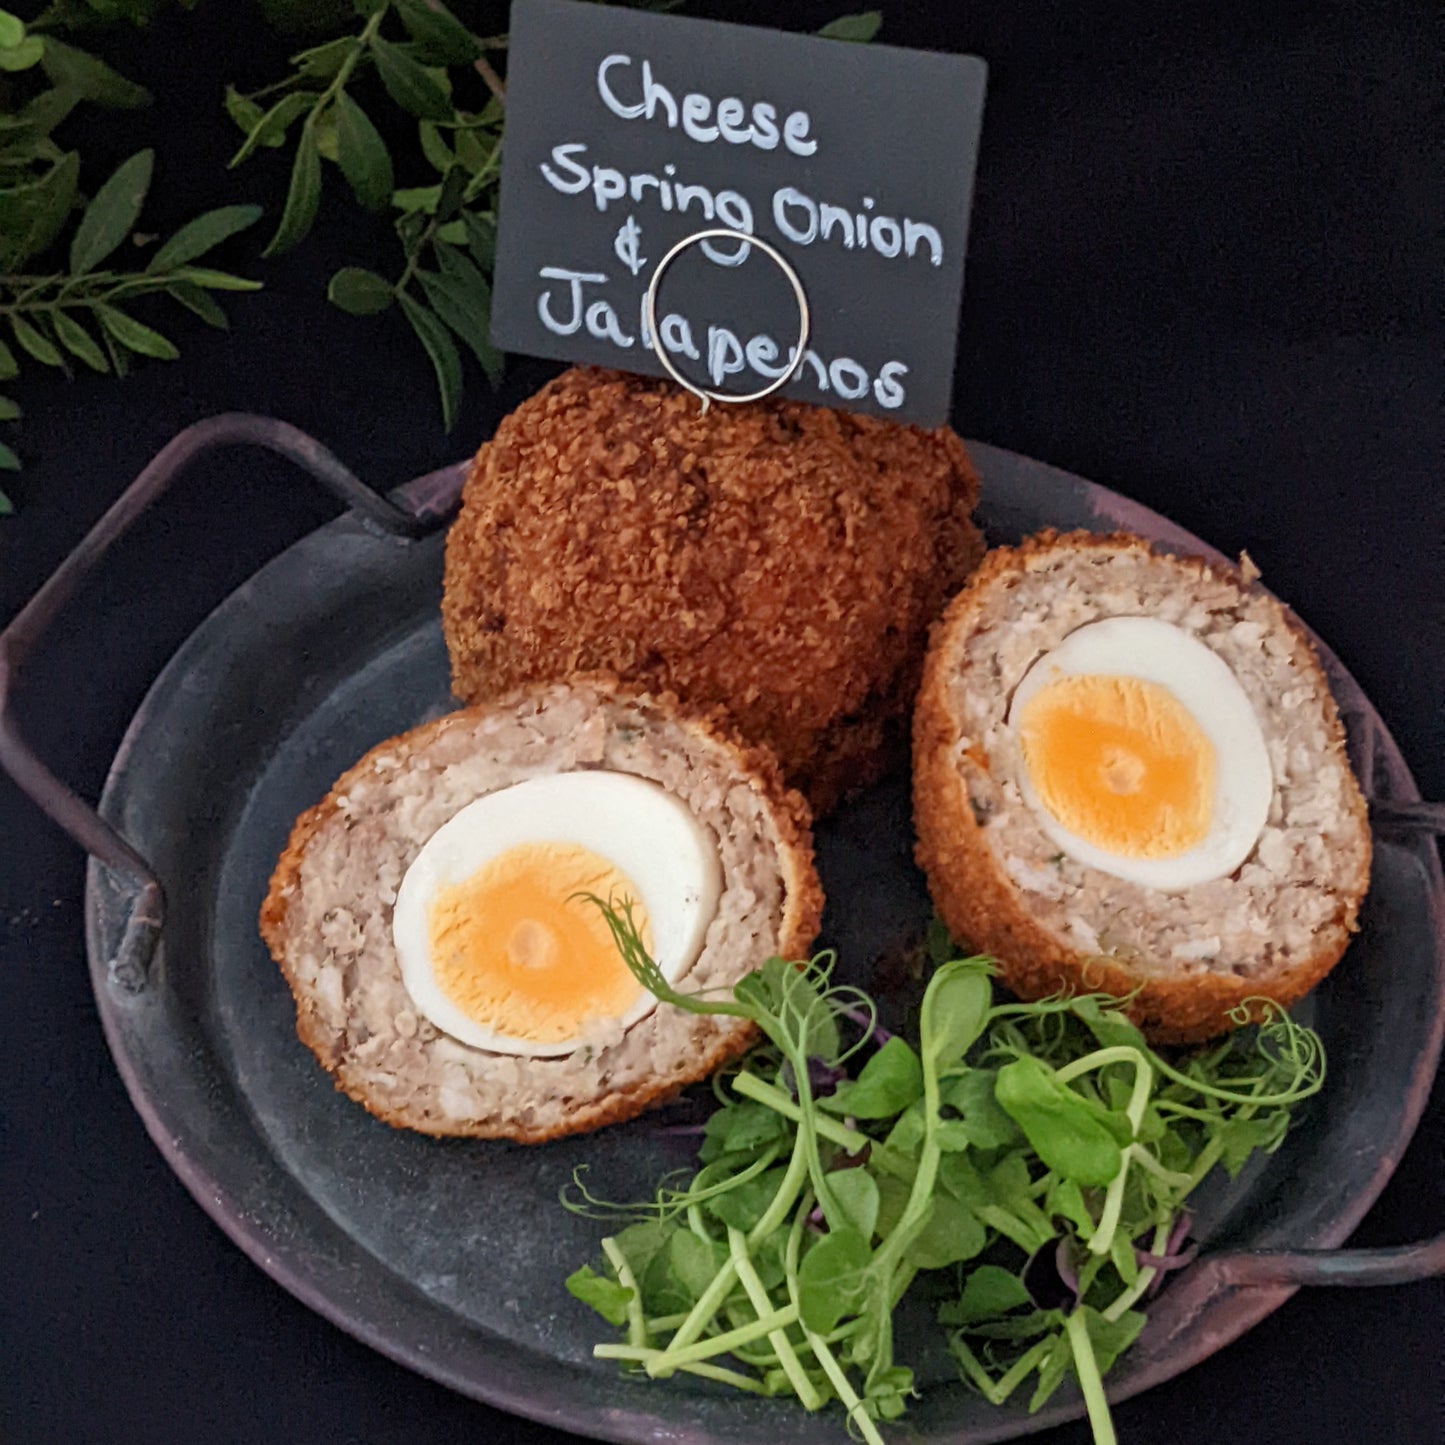 Gourmet Scotch Egg With Cheese, Spring Onion & Jalapeños